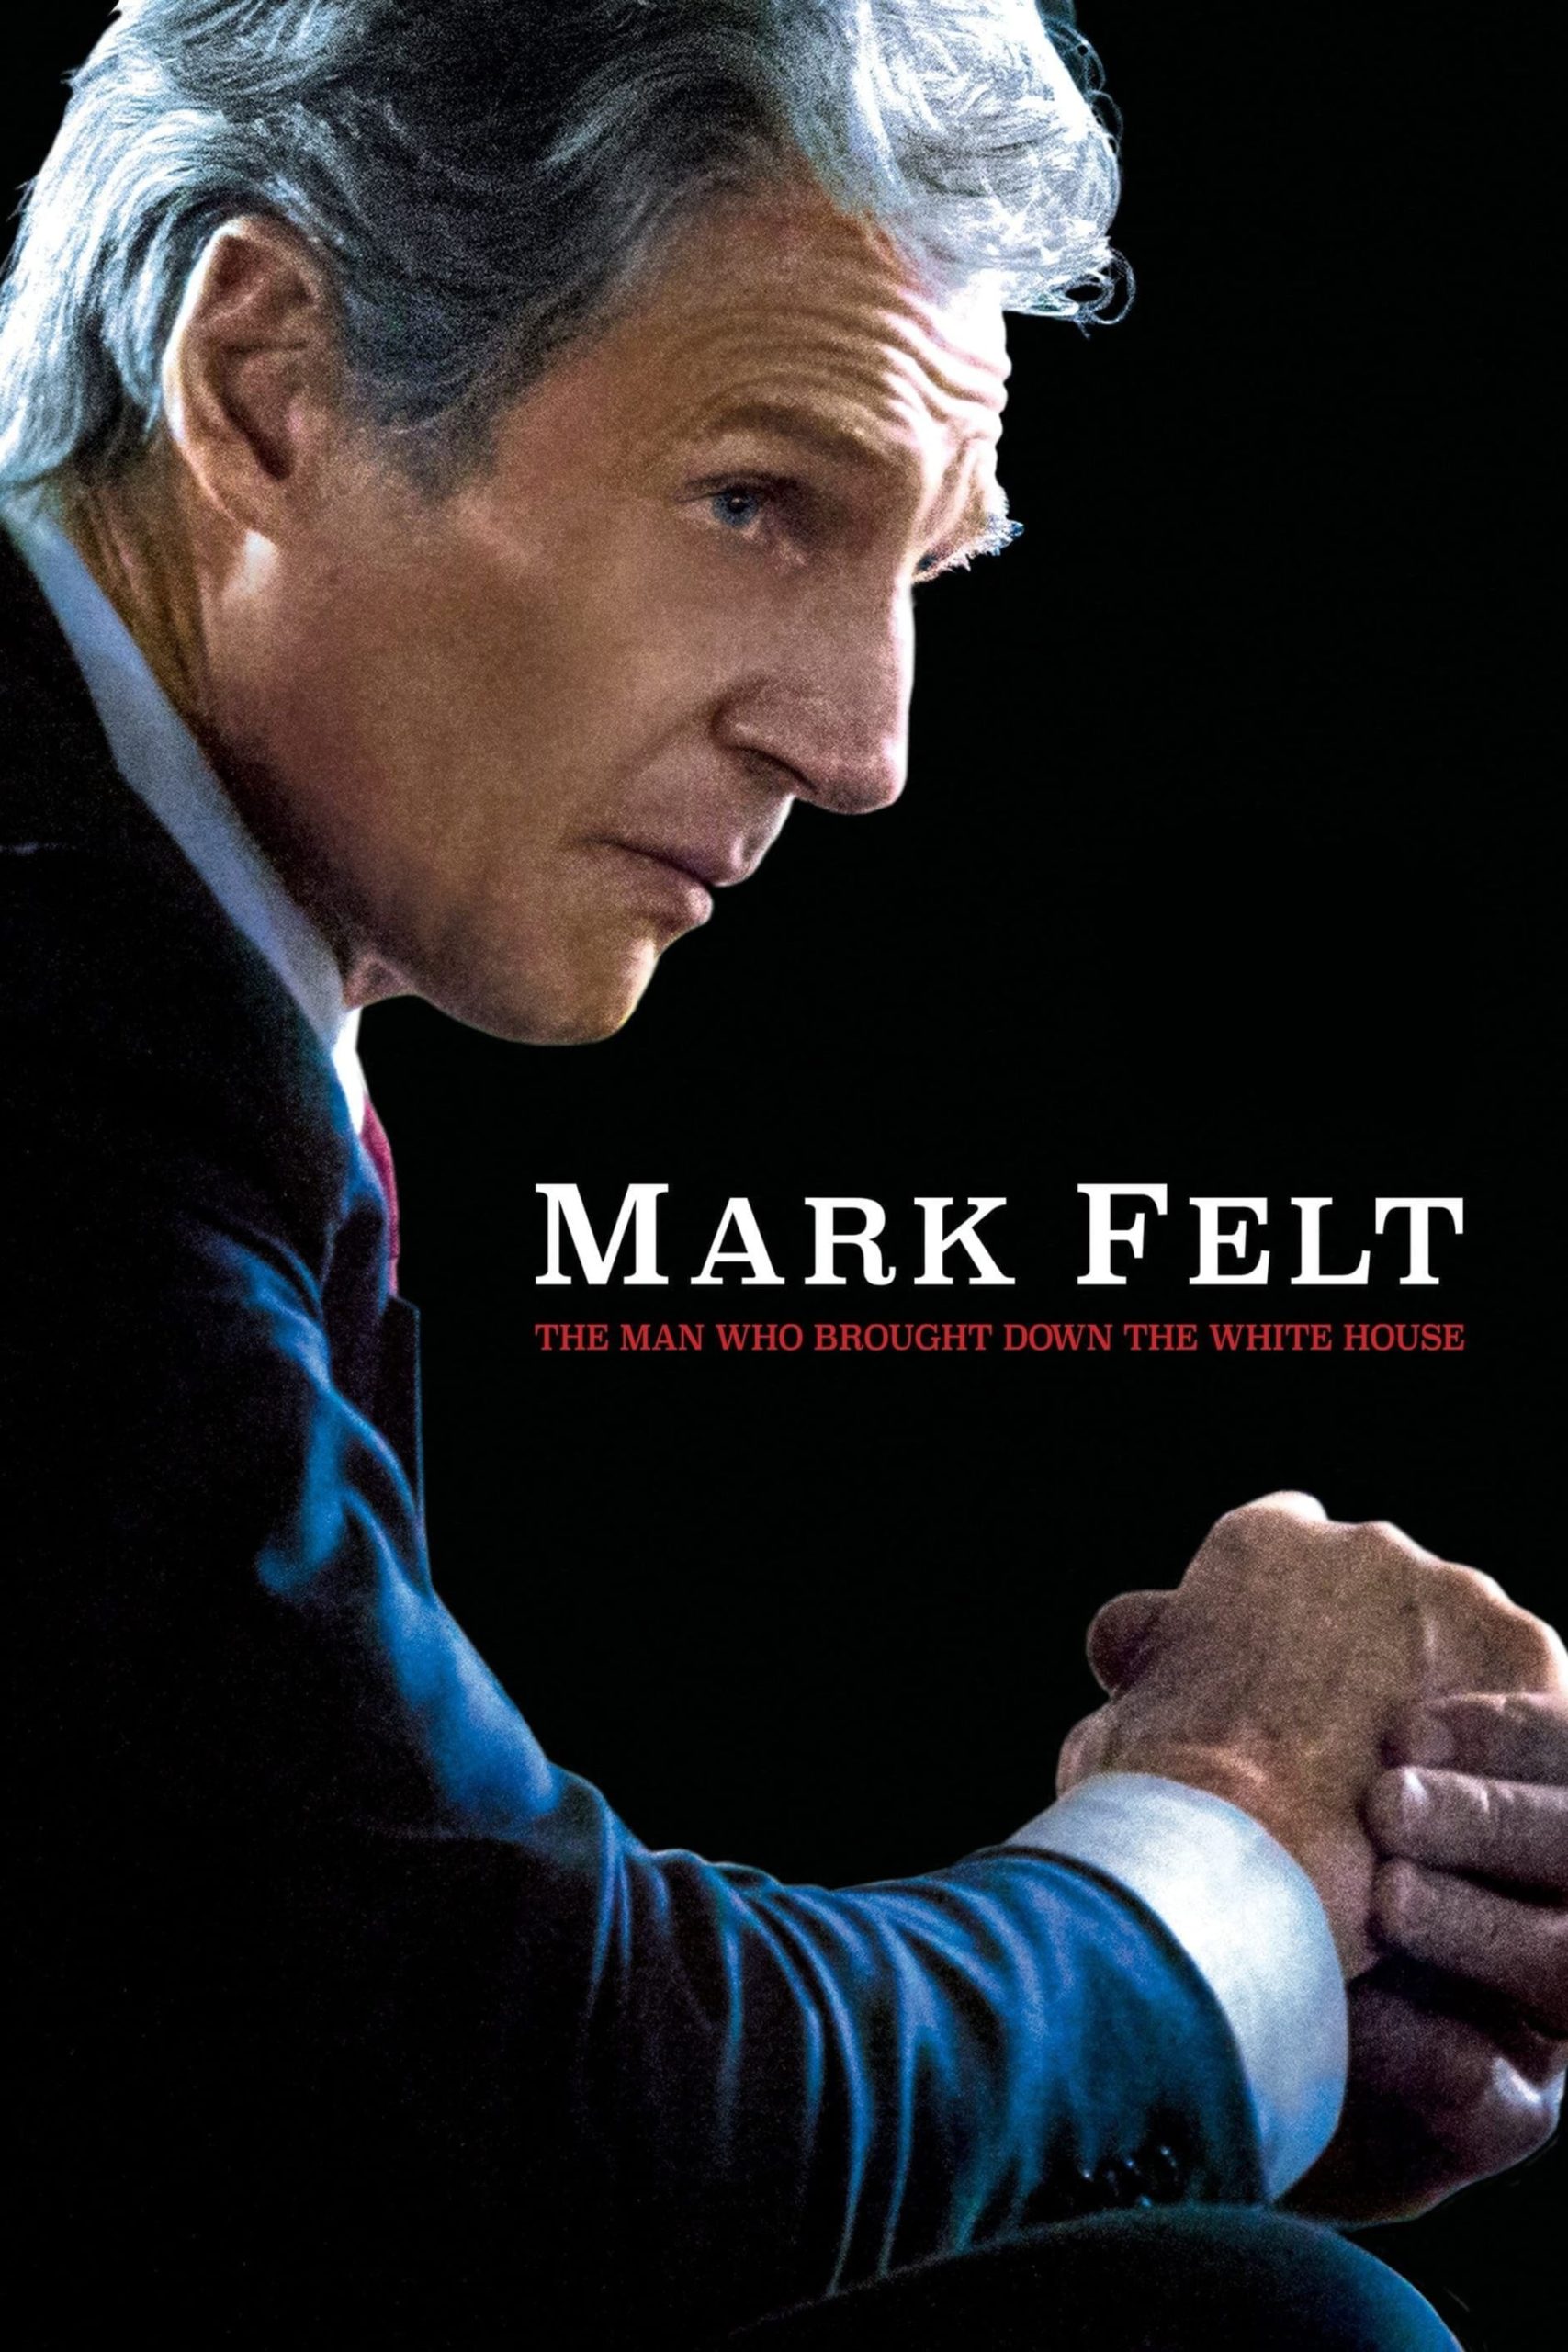 Poster for the movie "Mark Felt: The Man Who Brought Down the White House"